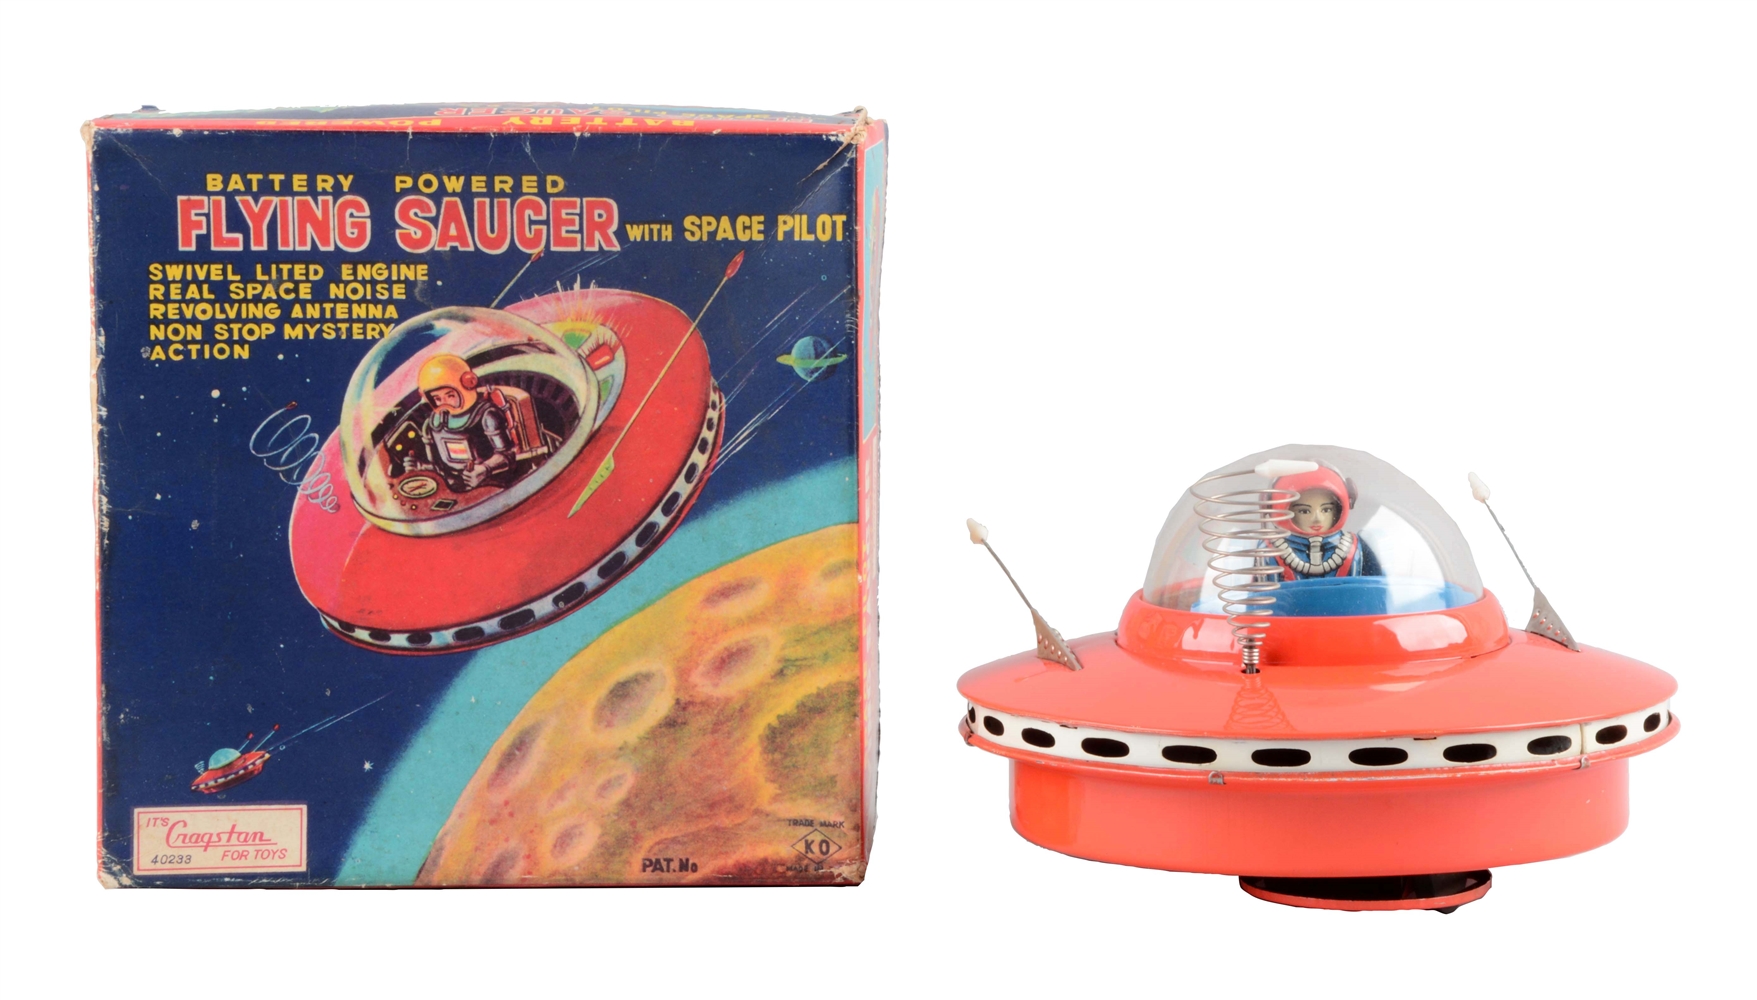 JAPANESE TIN LITHO BATTERY-OPERATED FLYING SAUCER WITH SPACE PILOT TOY.